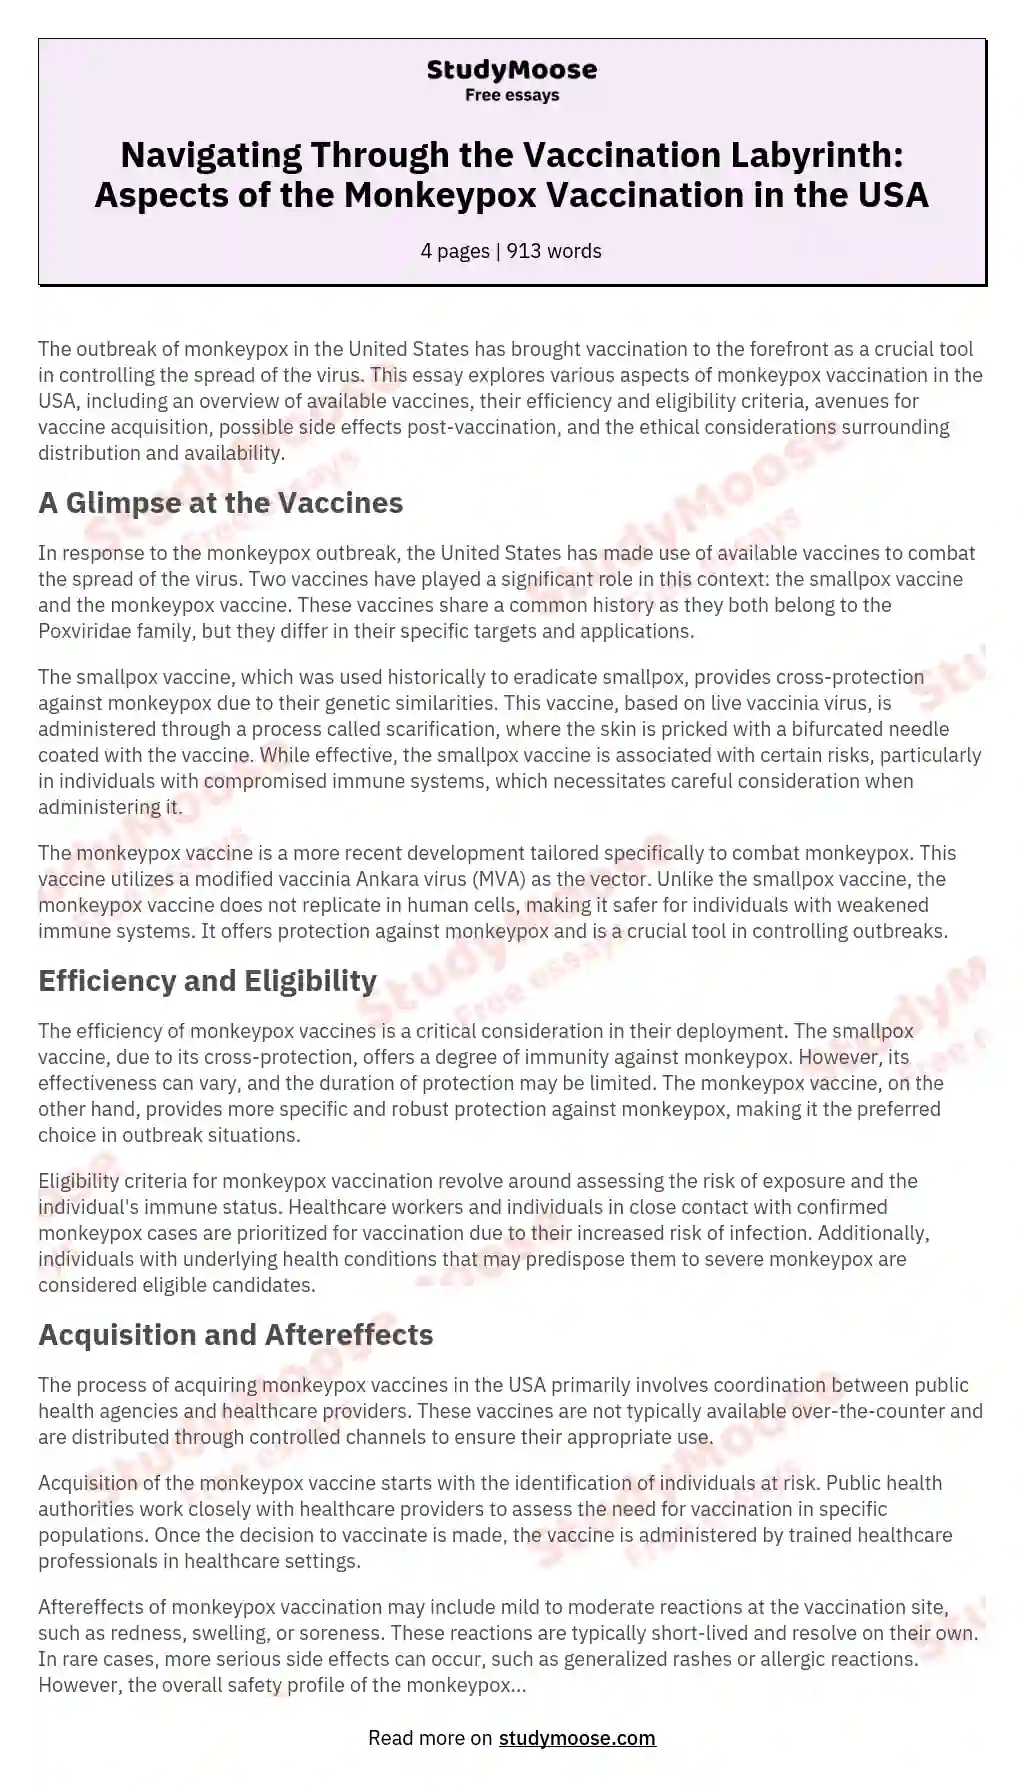 Navigating Through the Vaccination Labyrinth: Aspects of the Monkeypox Vaccination in the USA essay